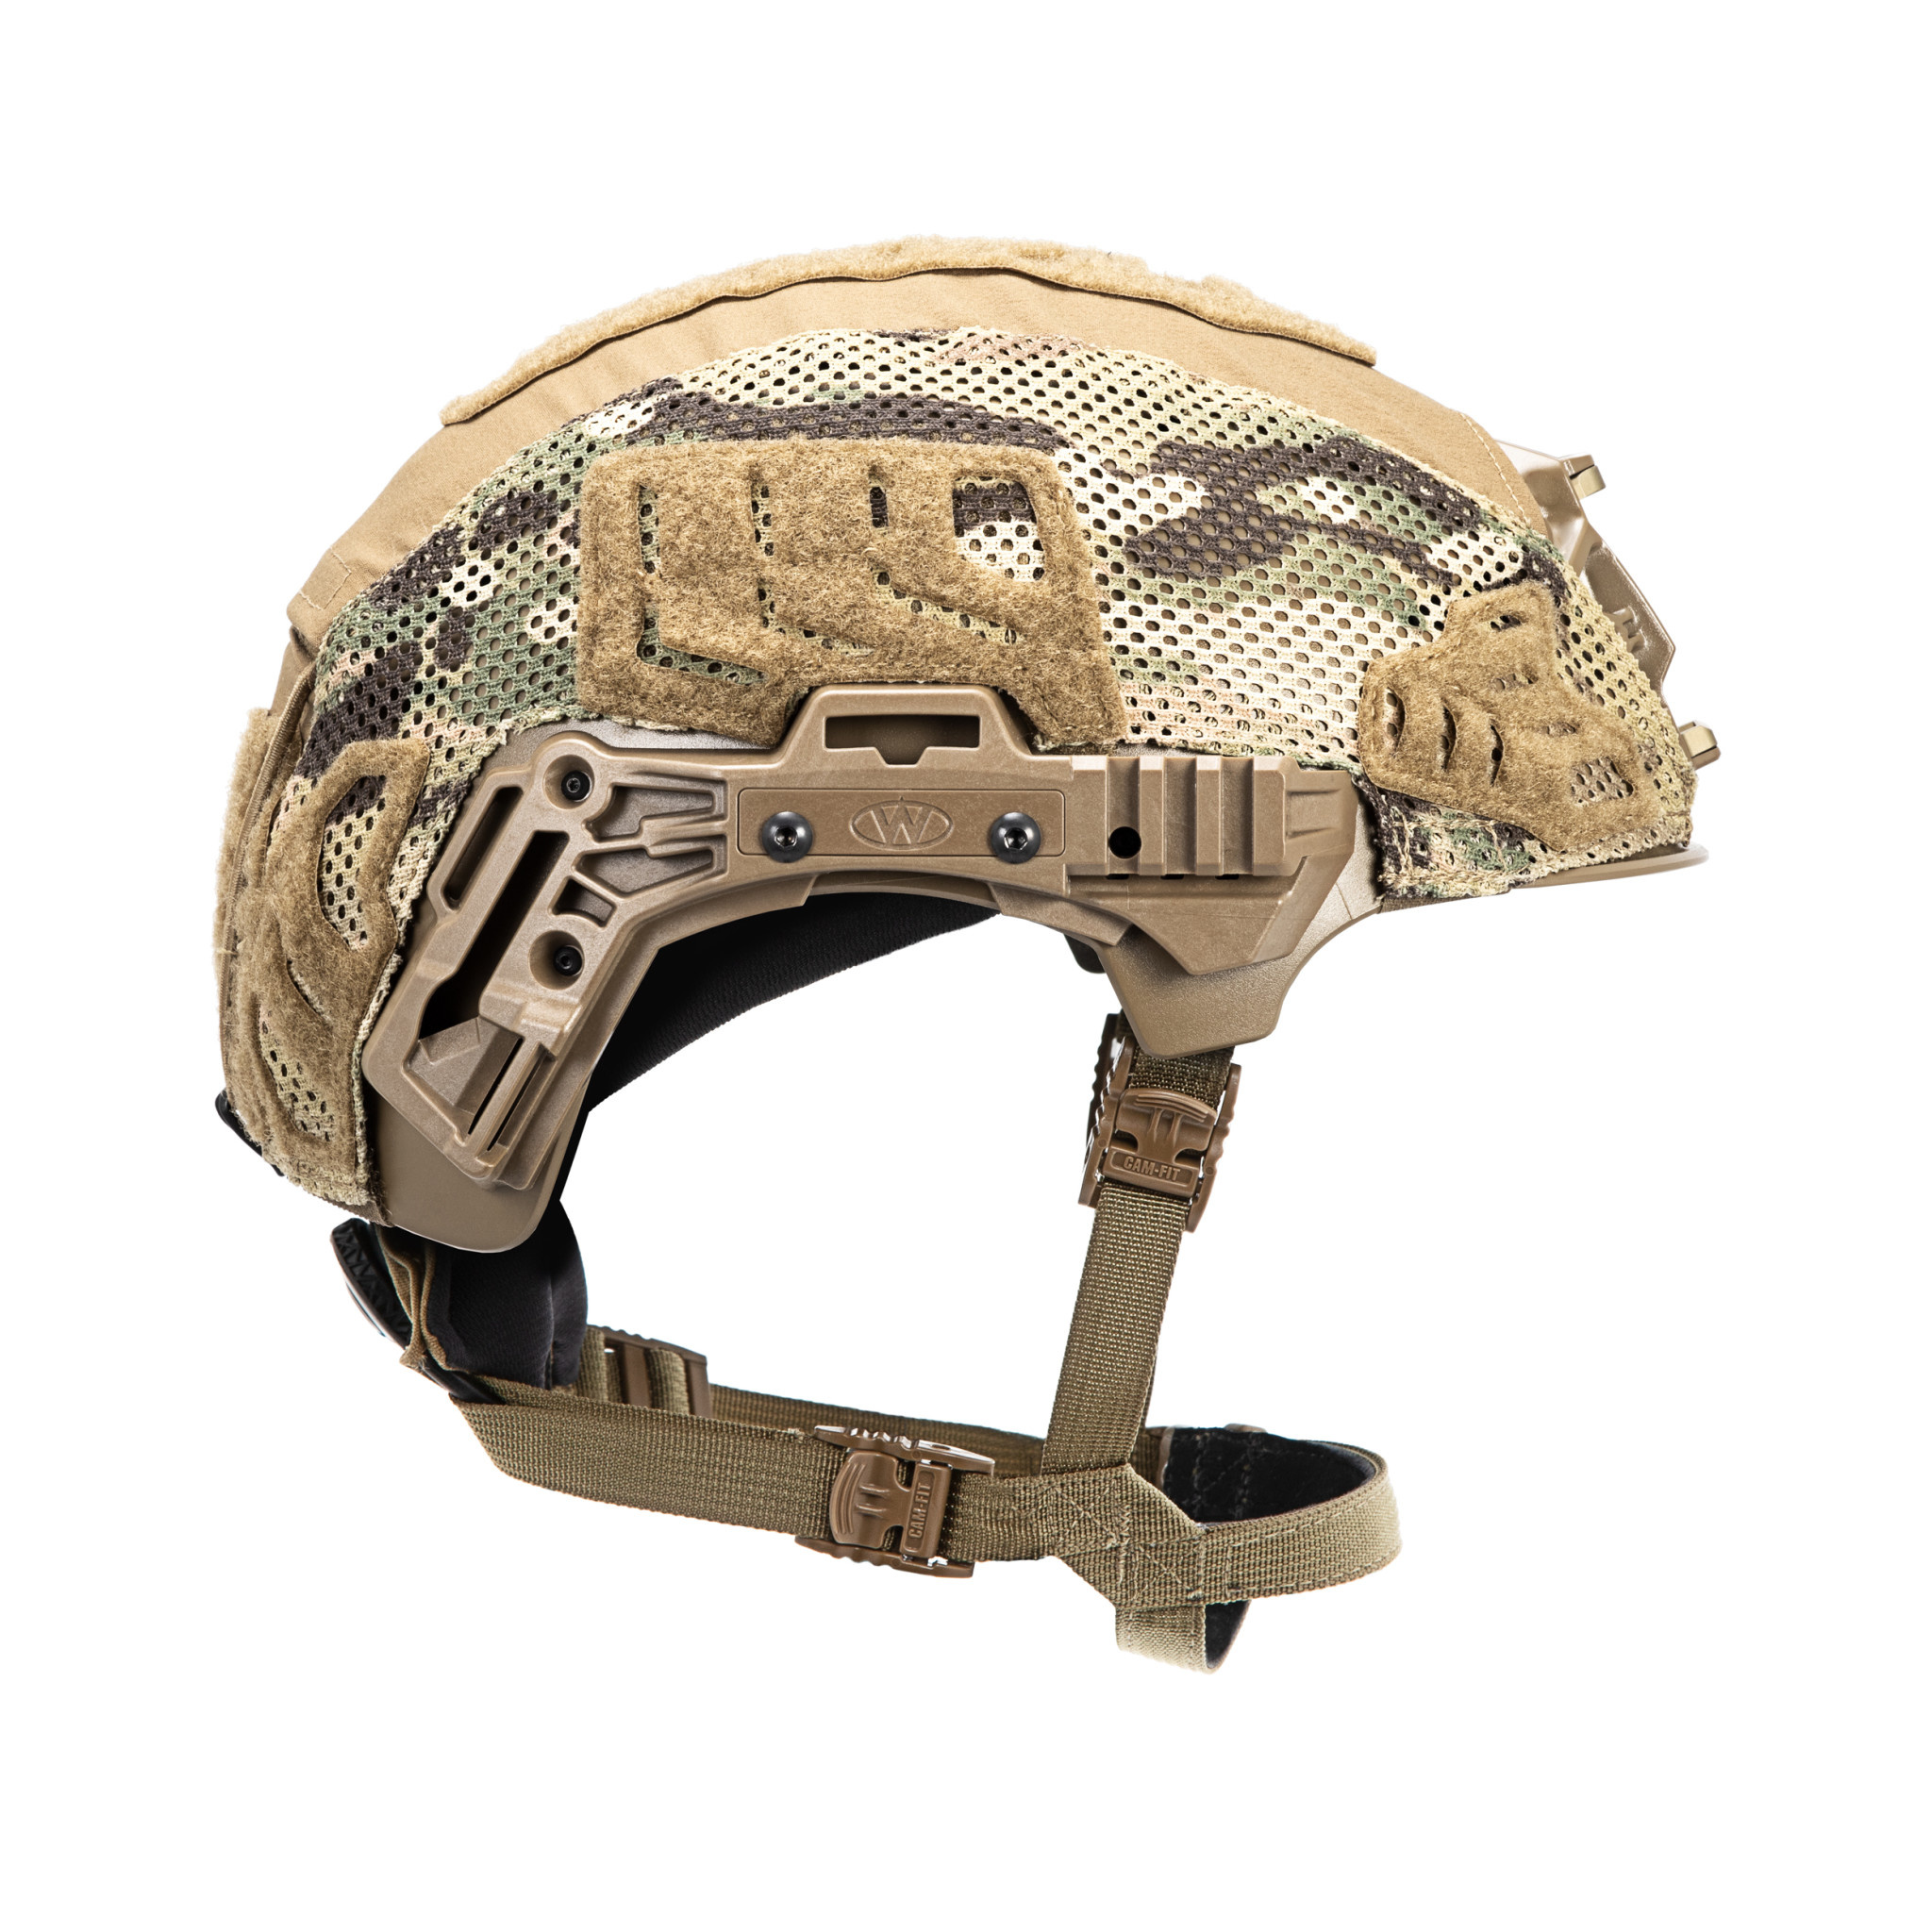 Team Wendy Team Wendy Helmet Cover Multicam for EXFIL® LTP (Fits Both Sizes) with Rail 3.0